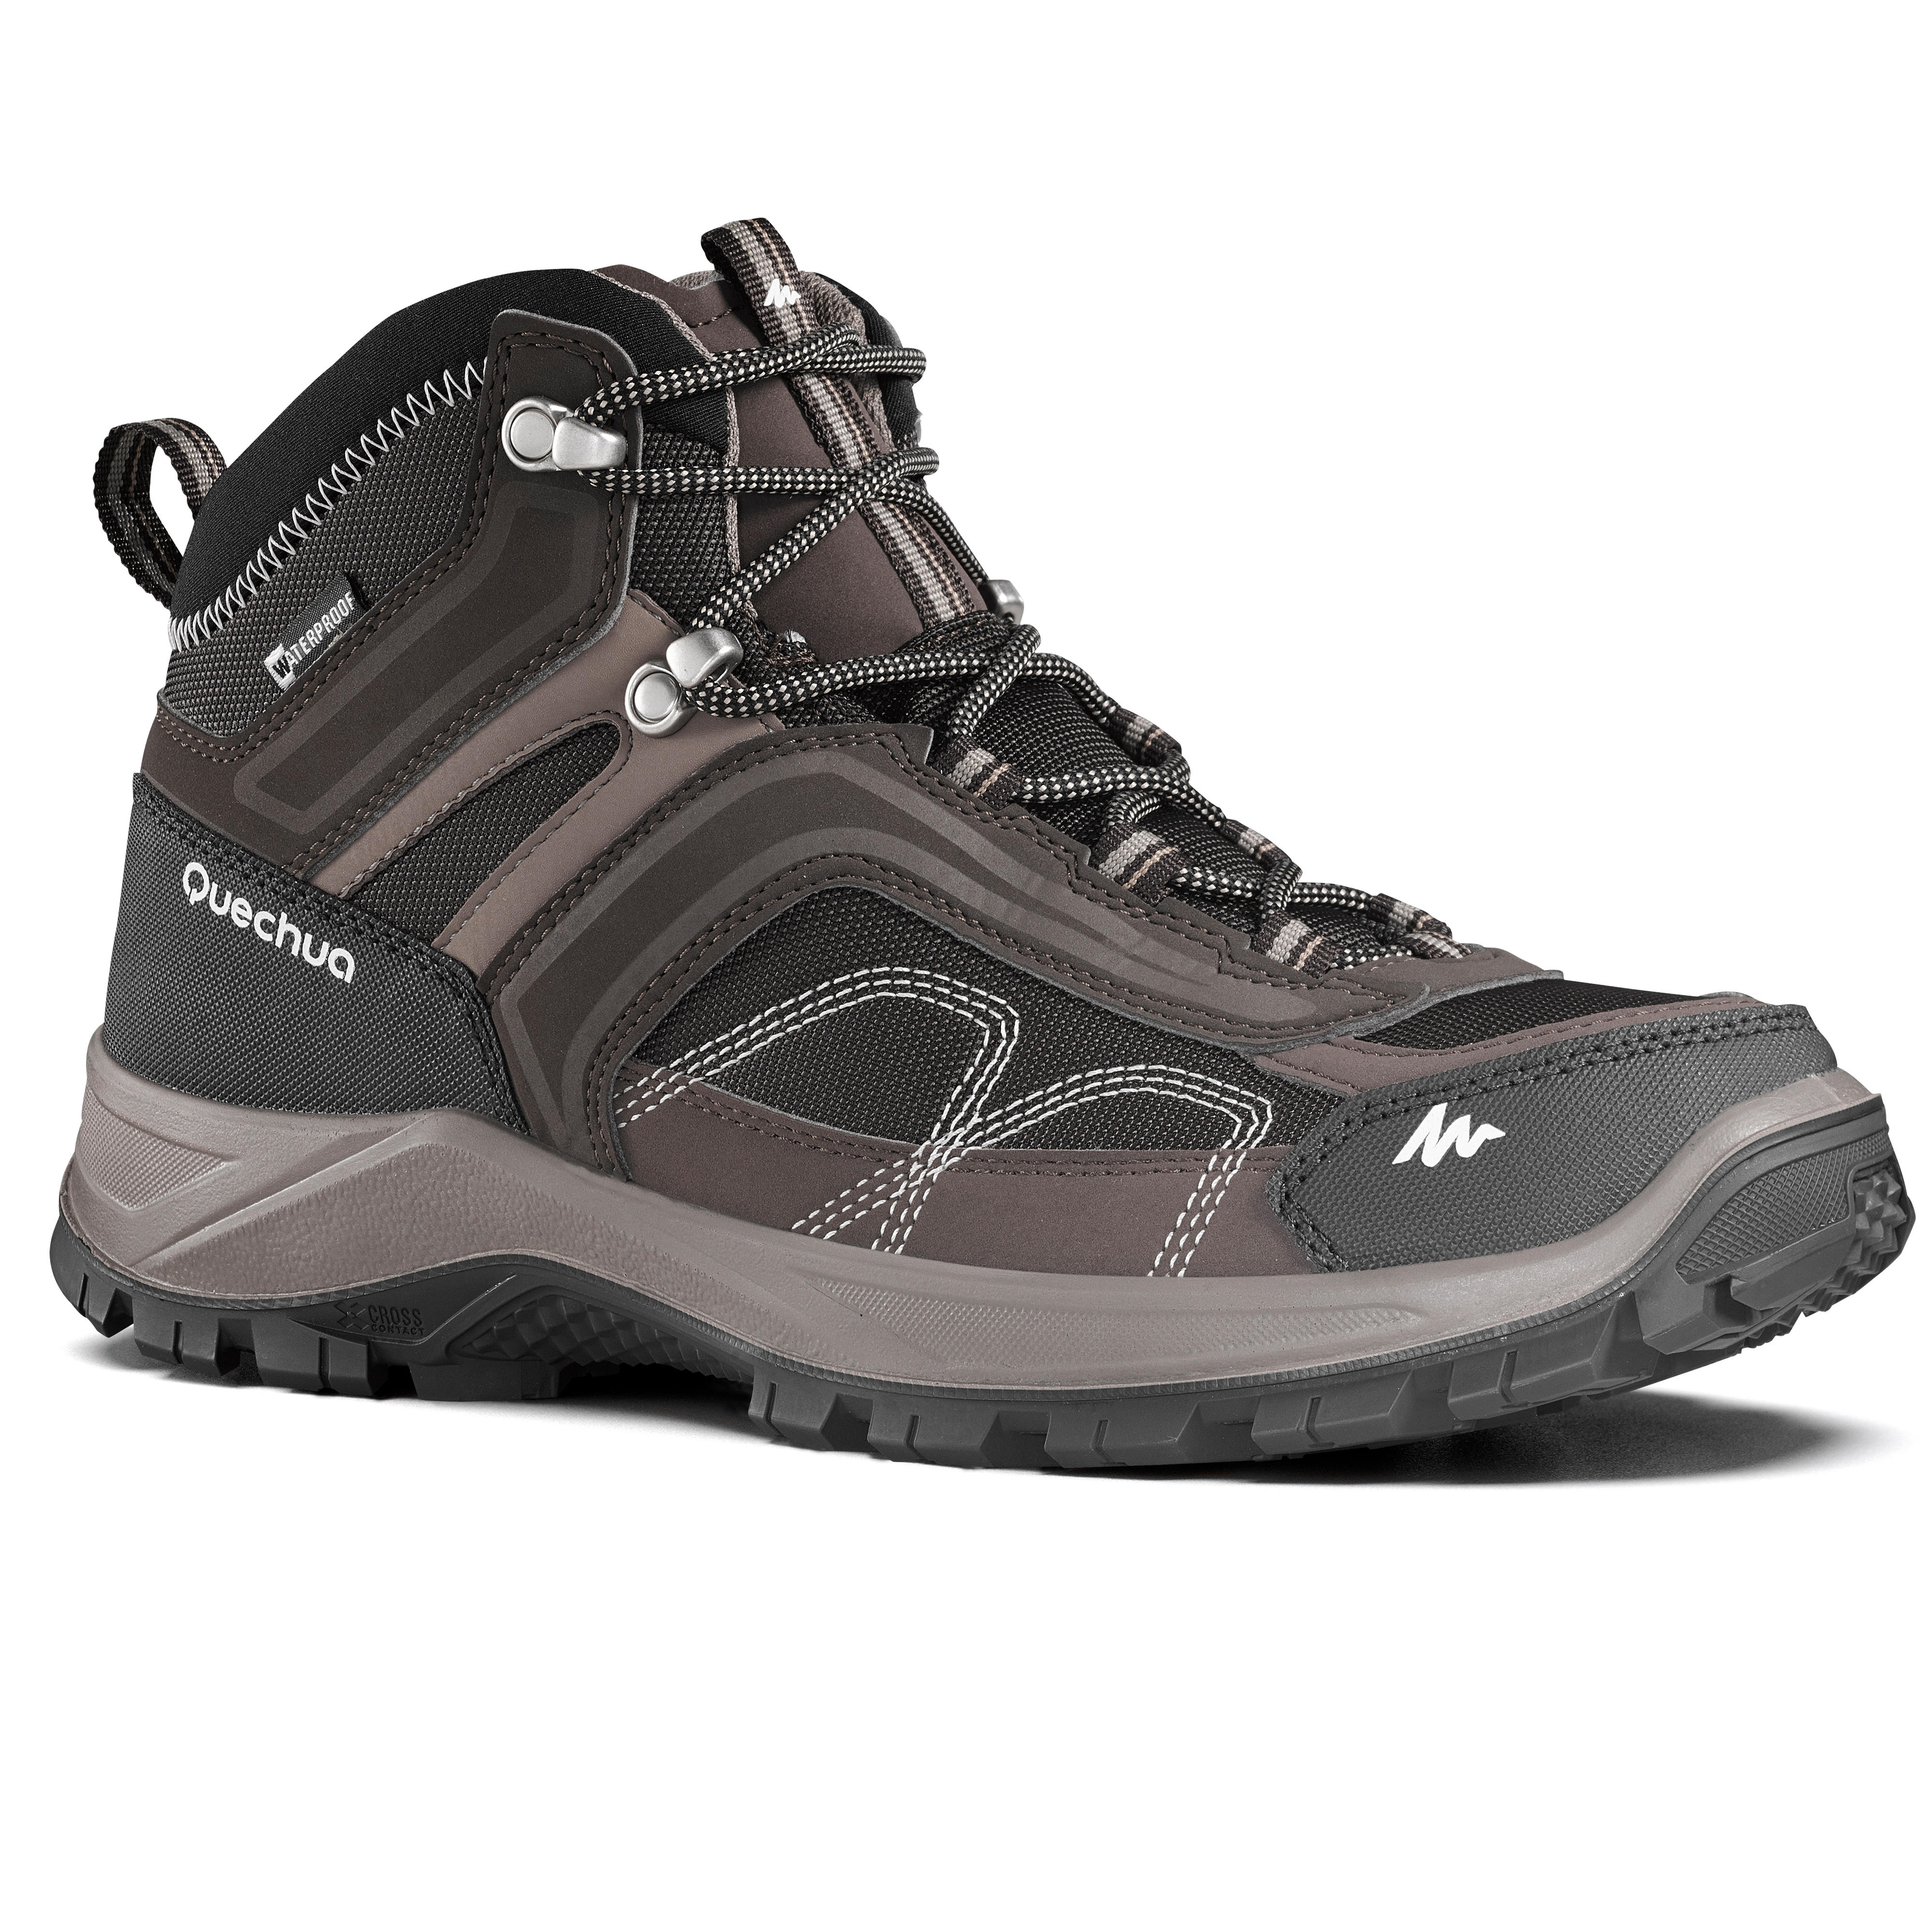 MH100 Mid waterproof Men's Hiking shoes 